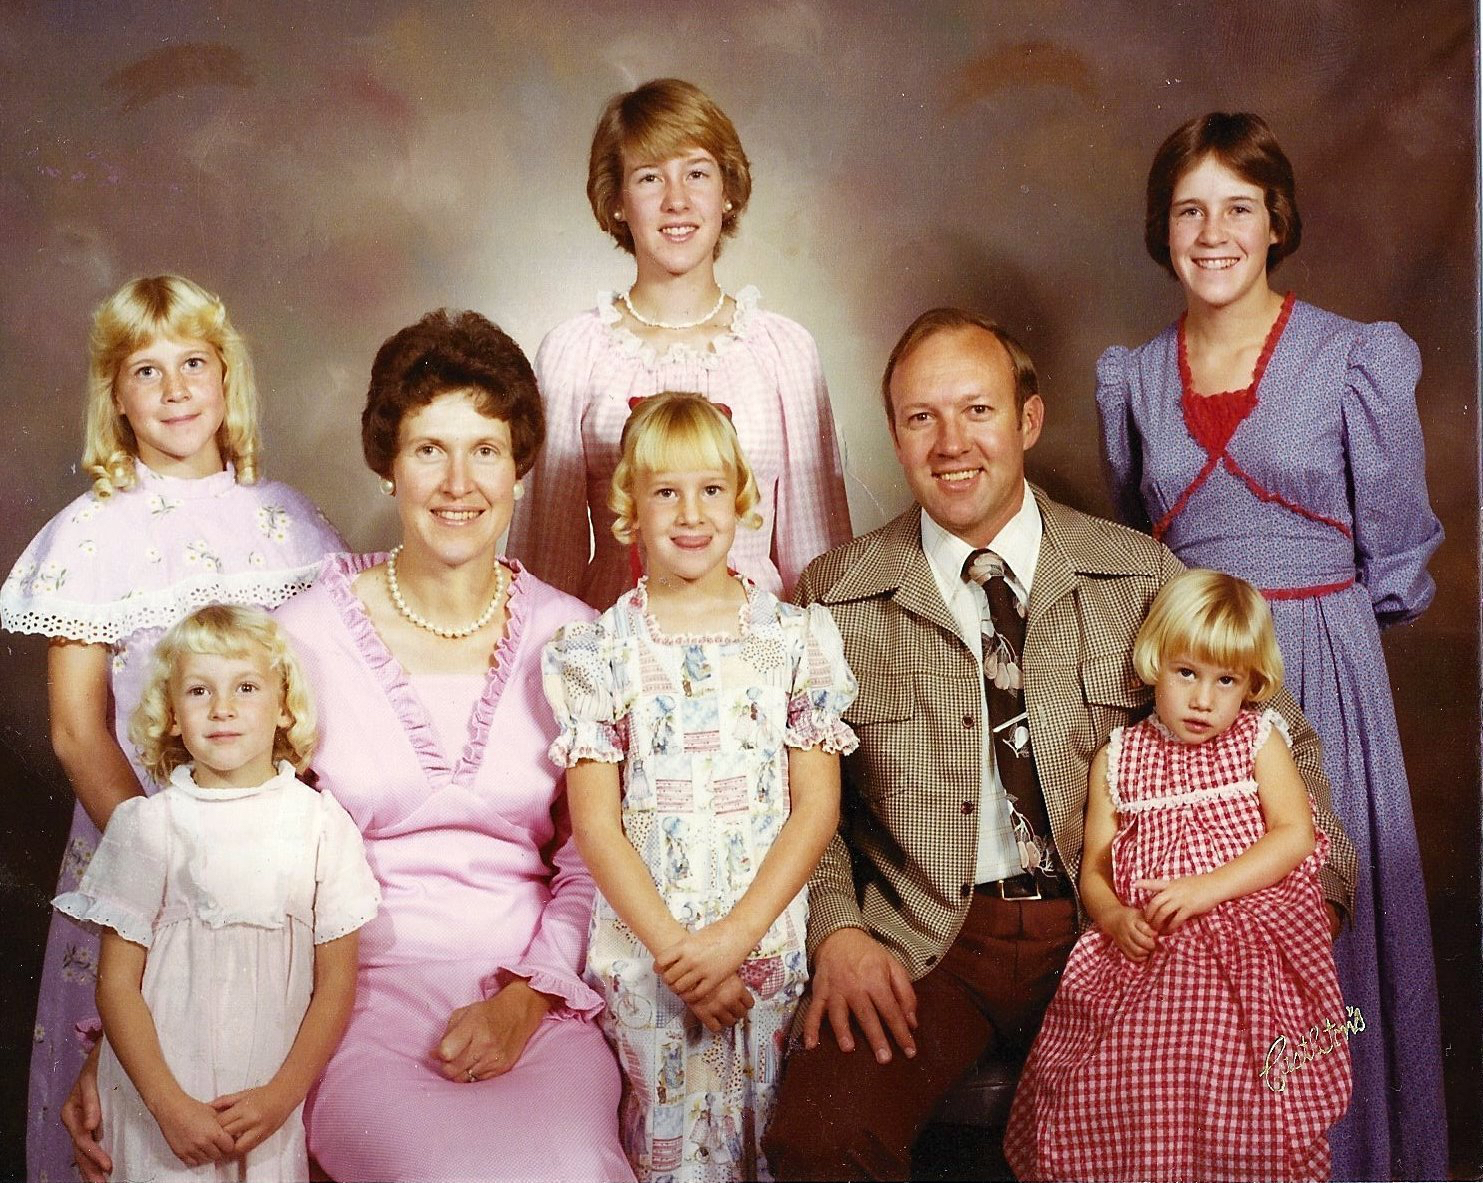 Me, my five sisters, and my parents.